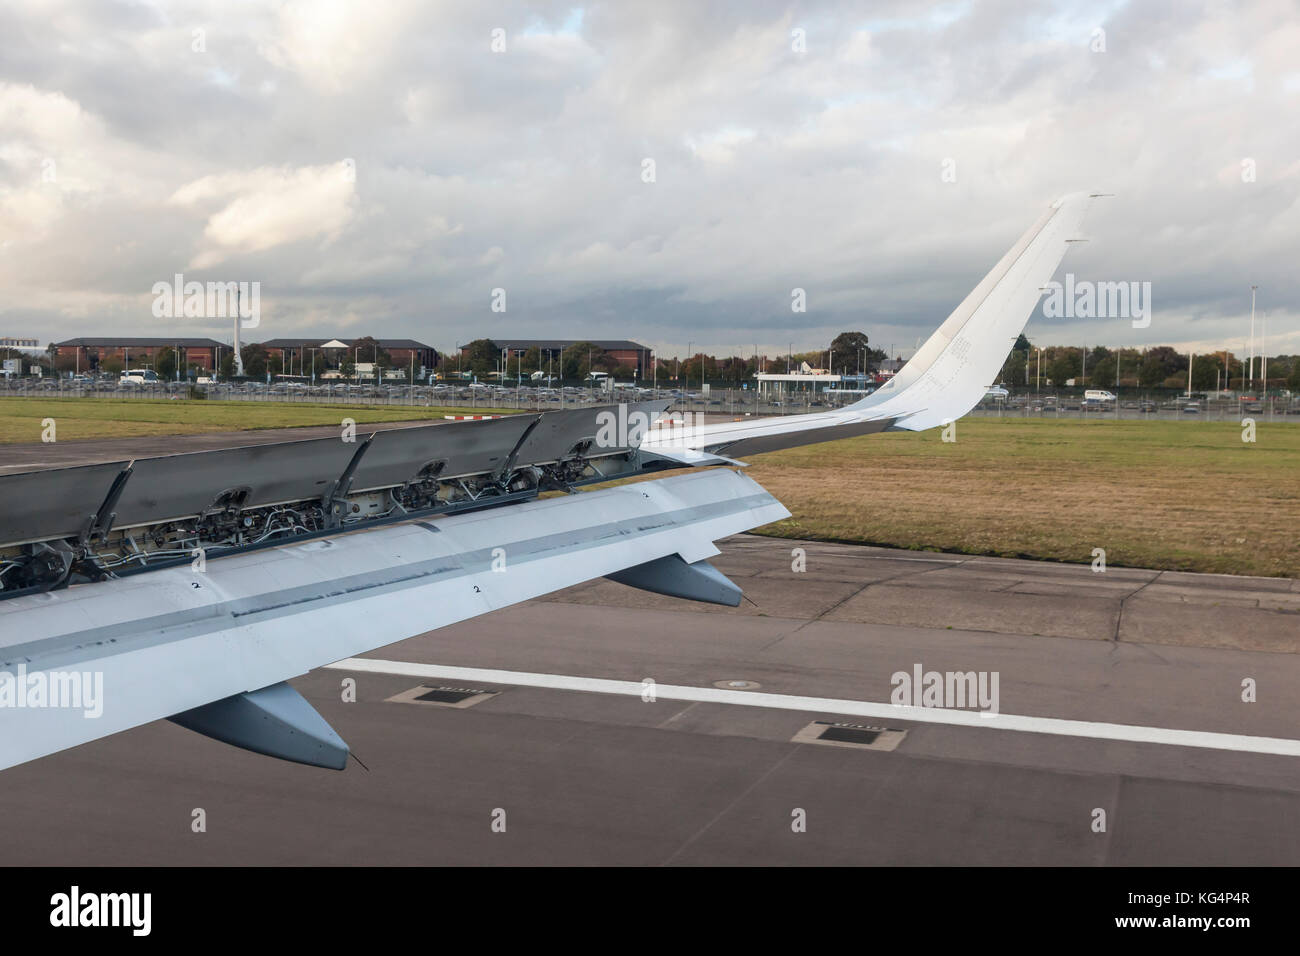 Airplane wing with raised up spoilers for braking after landing Stock Photo